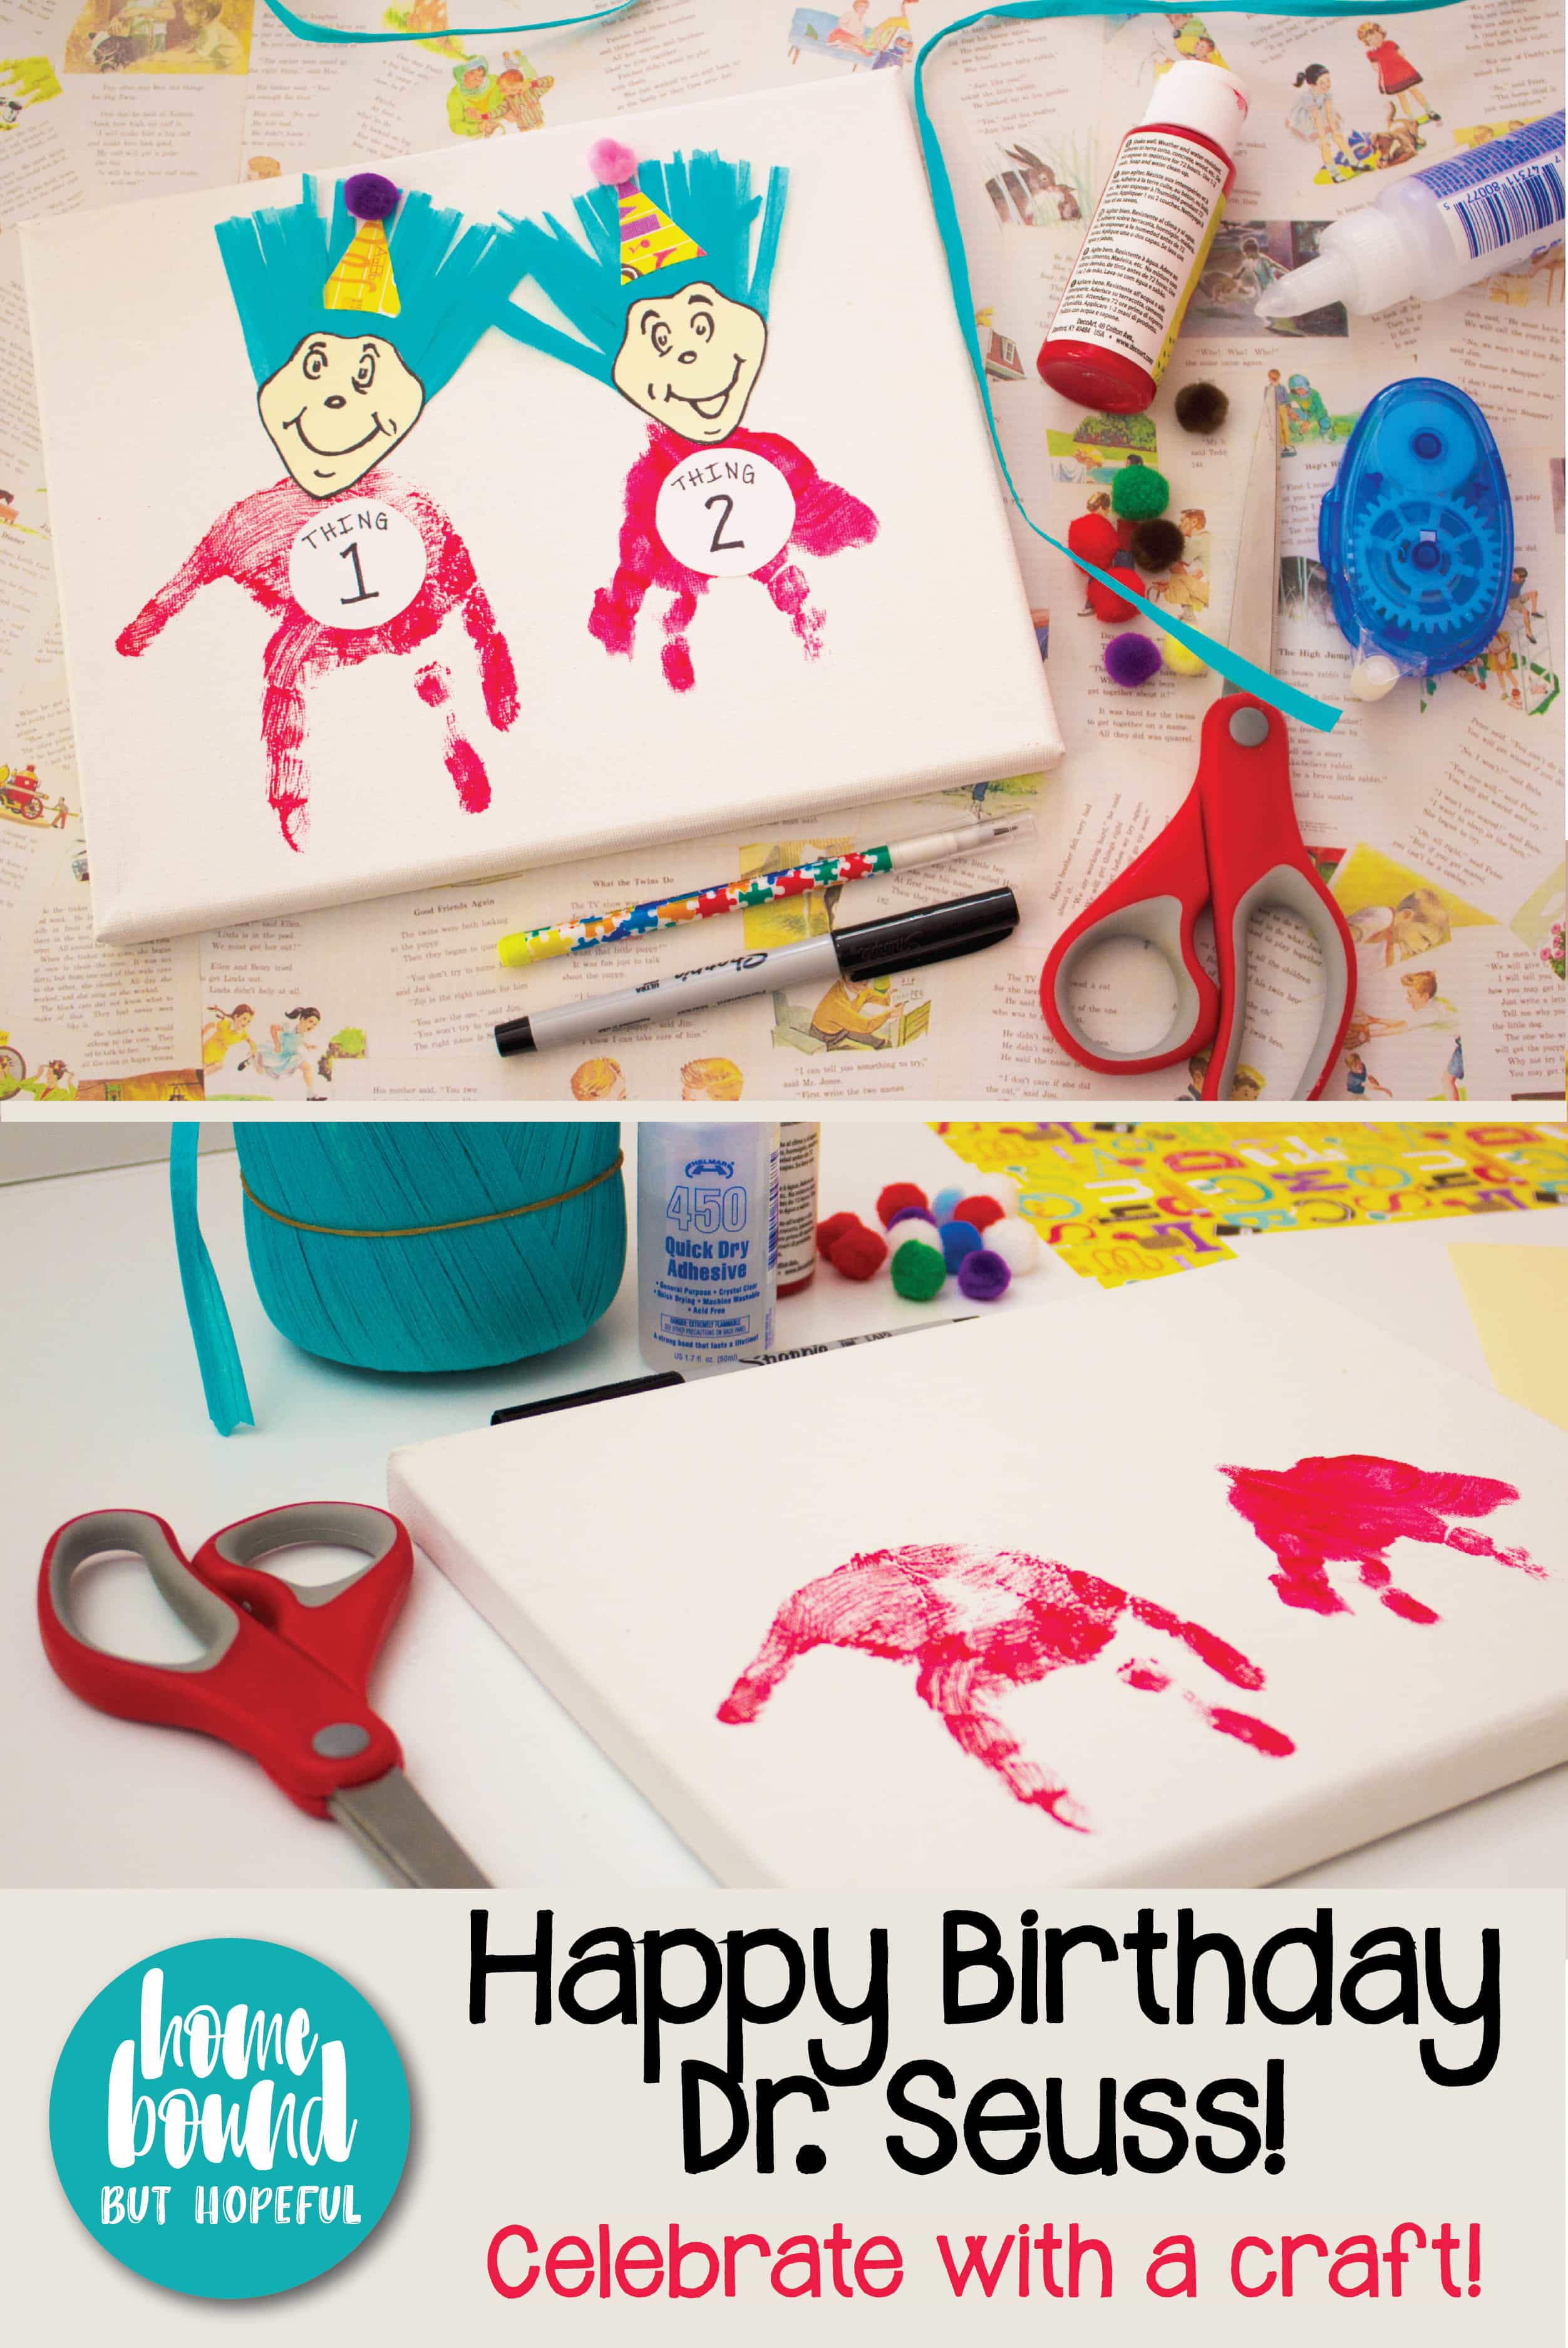 Did you know that Dr. Seuss' birthday is March 2? Check out the celebrating Thing 1 and Thing 2 craft we put together in honor of his big day!